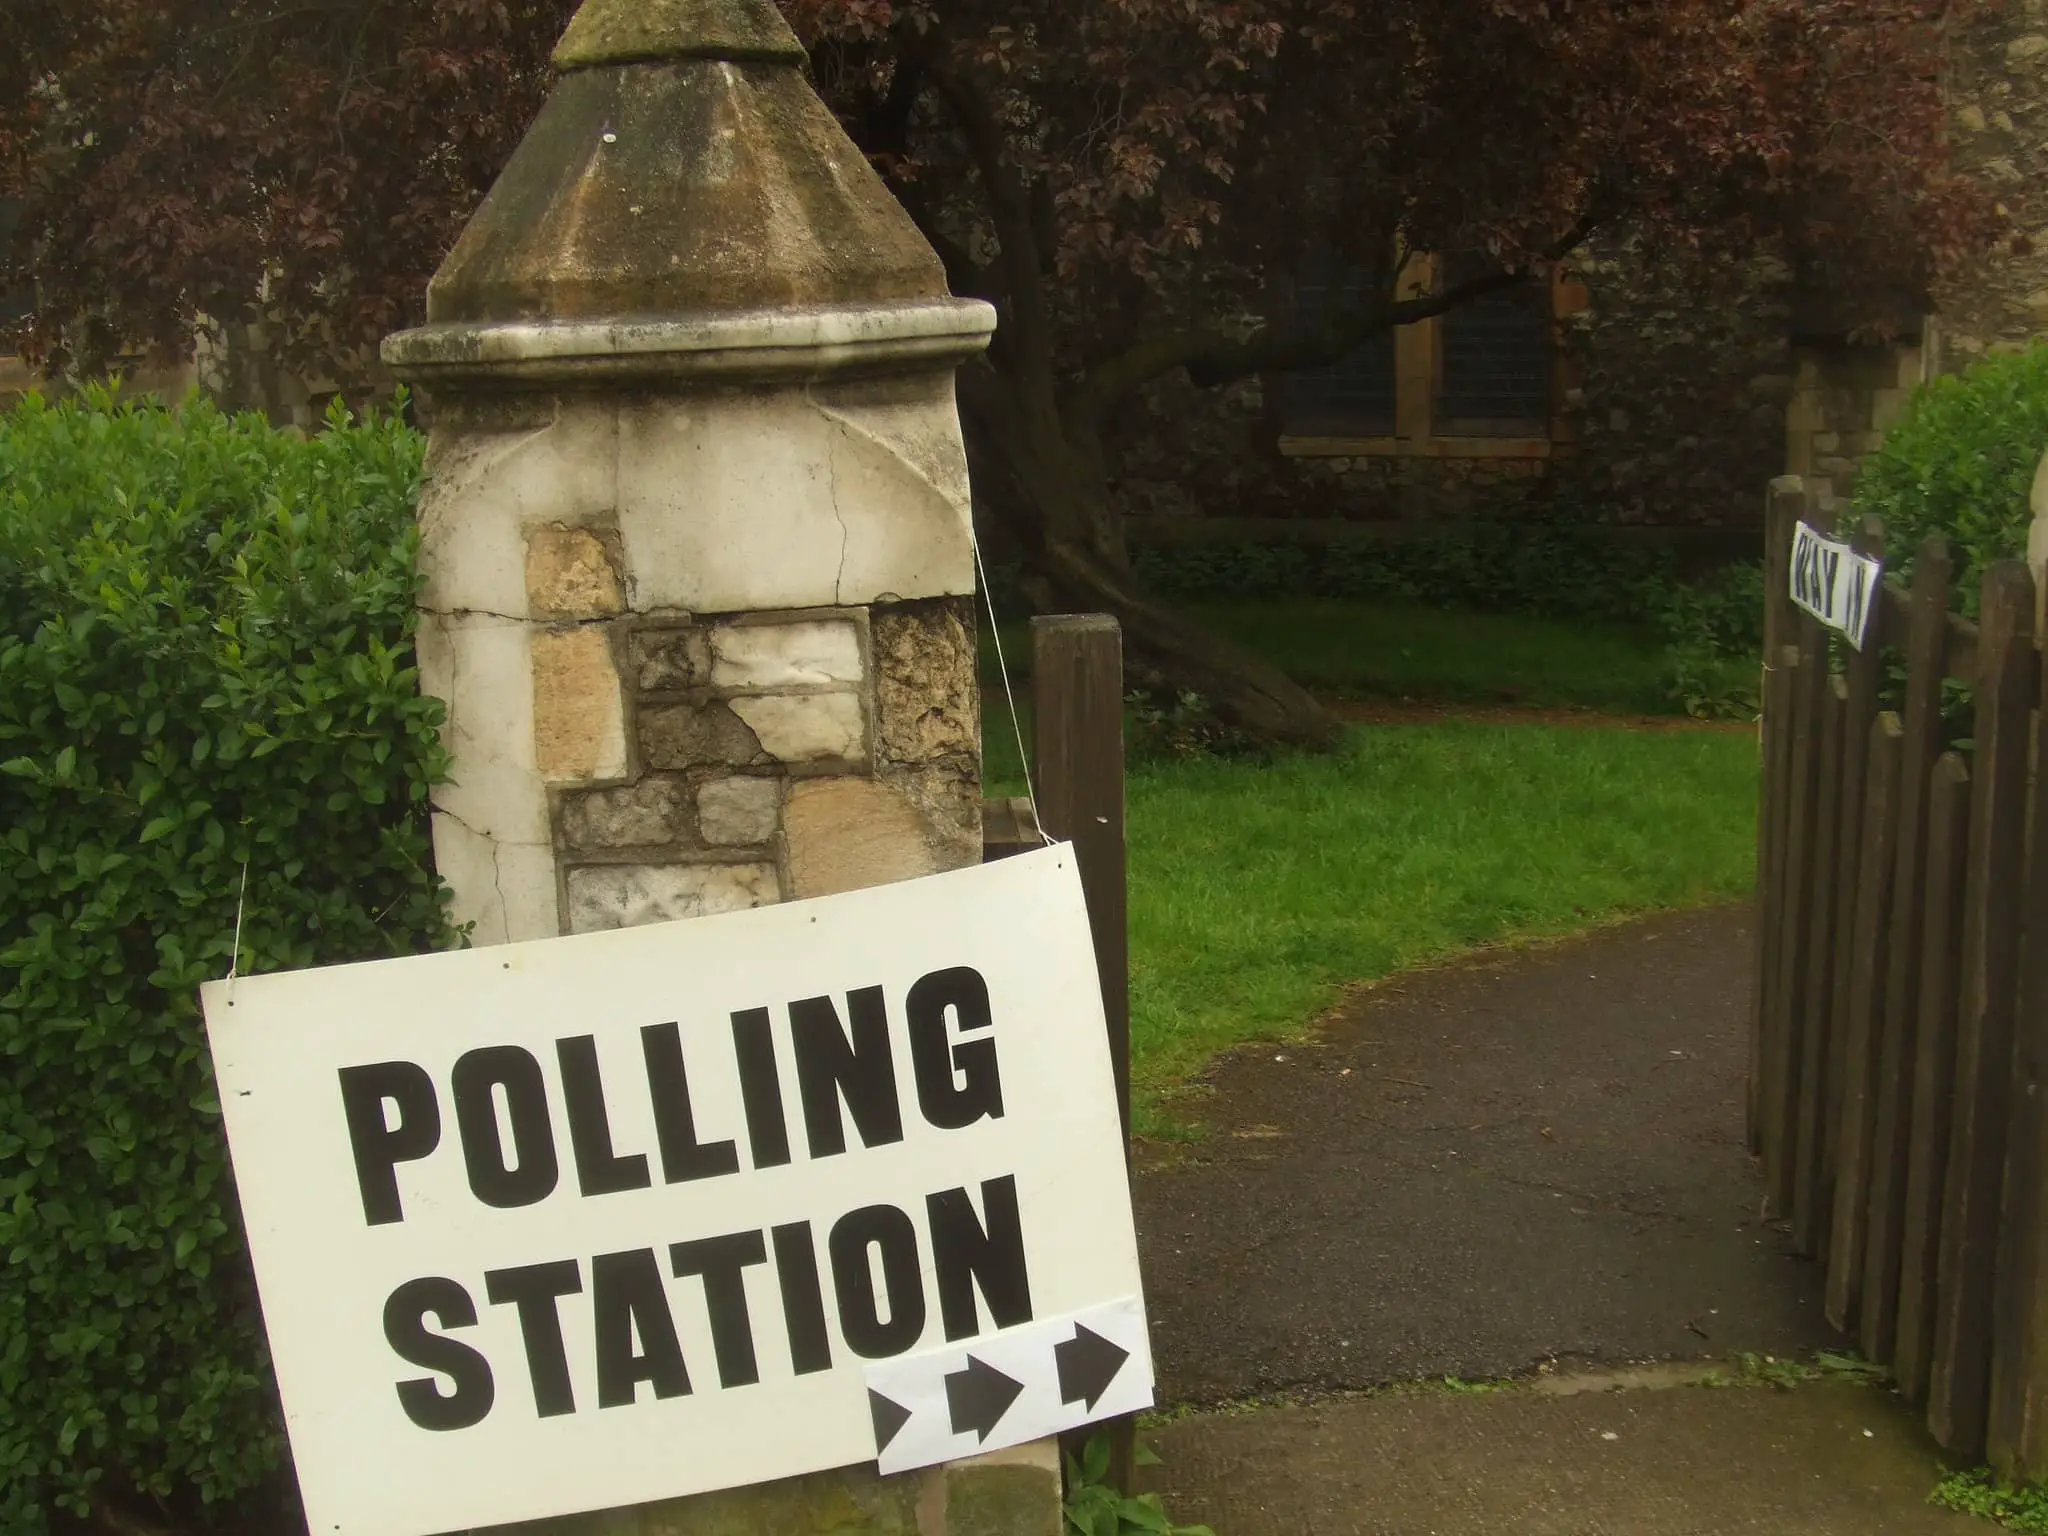 Polling station sign on wall leading into garden